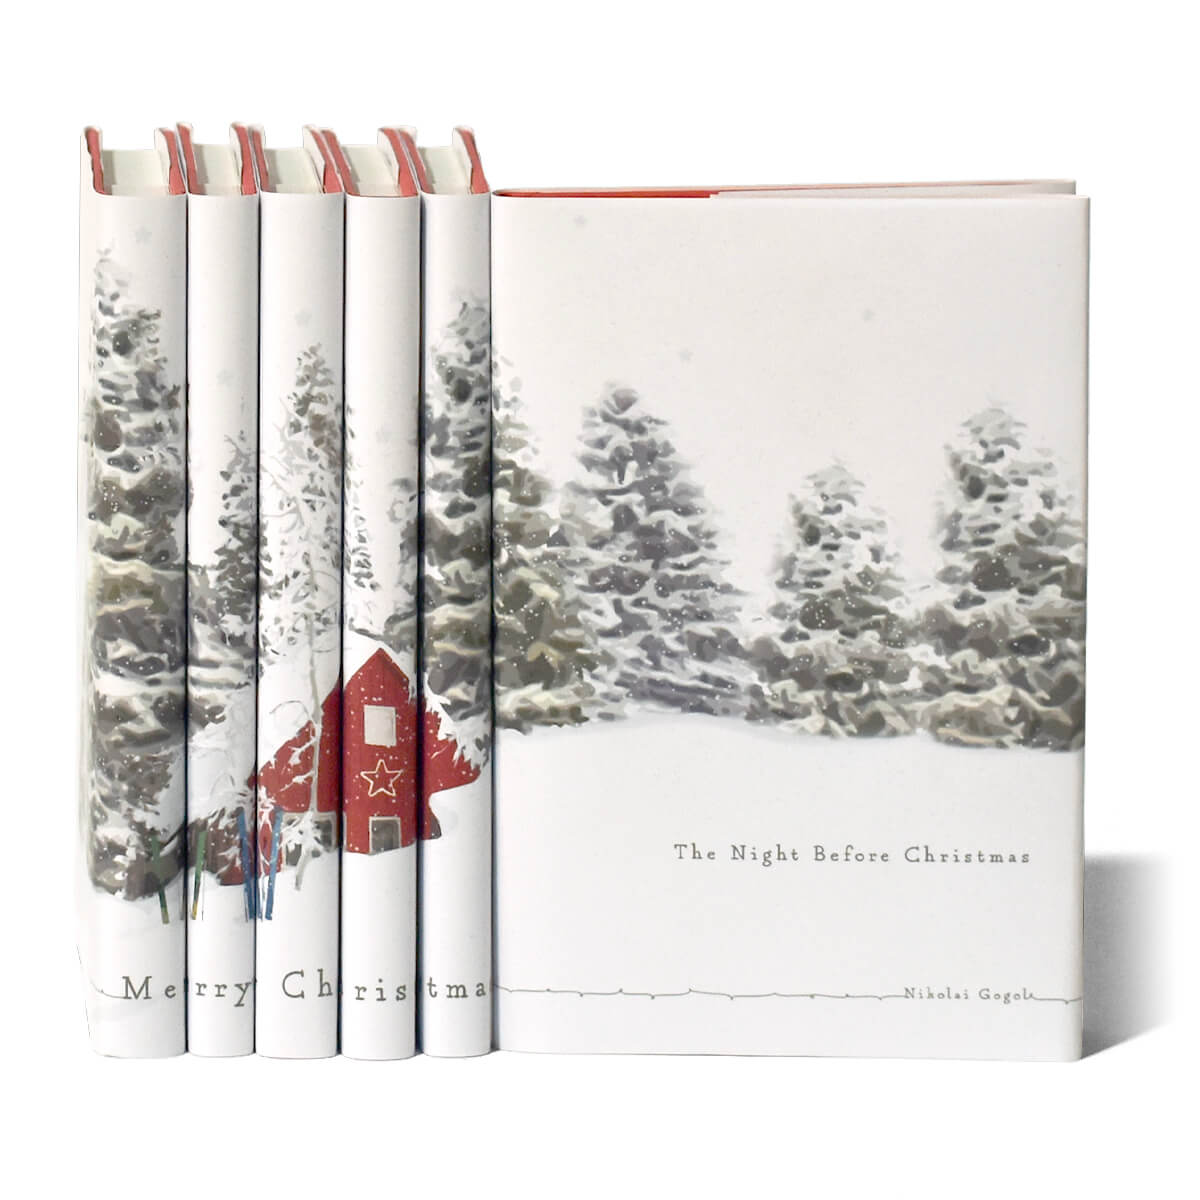 This festive set of novels is the perfect way to celebrate your favorite year-end traditions. Book Set, gift, trade, Christmas shopping. 